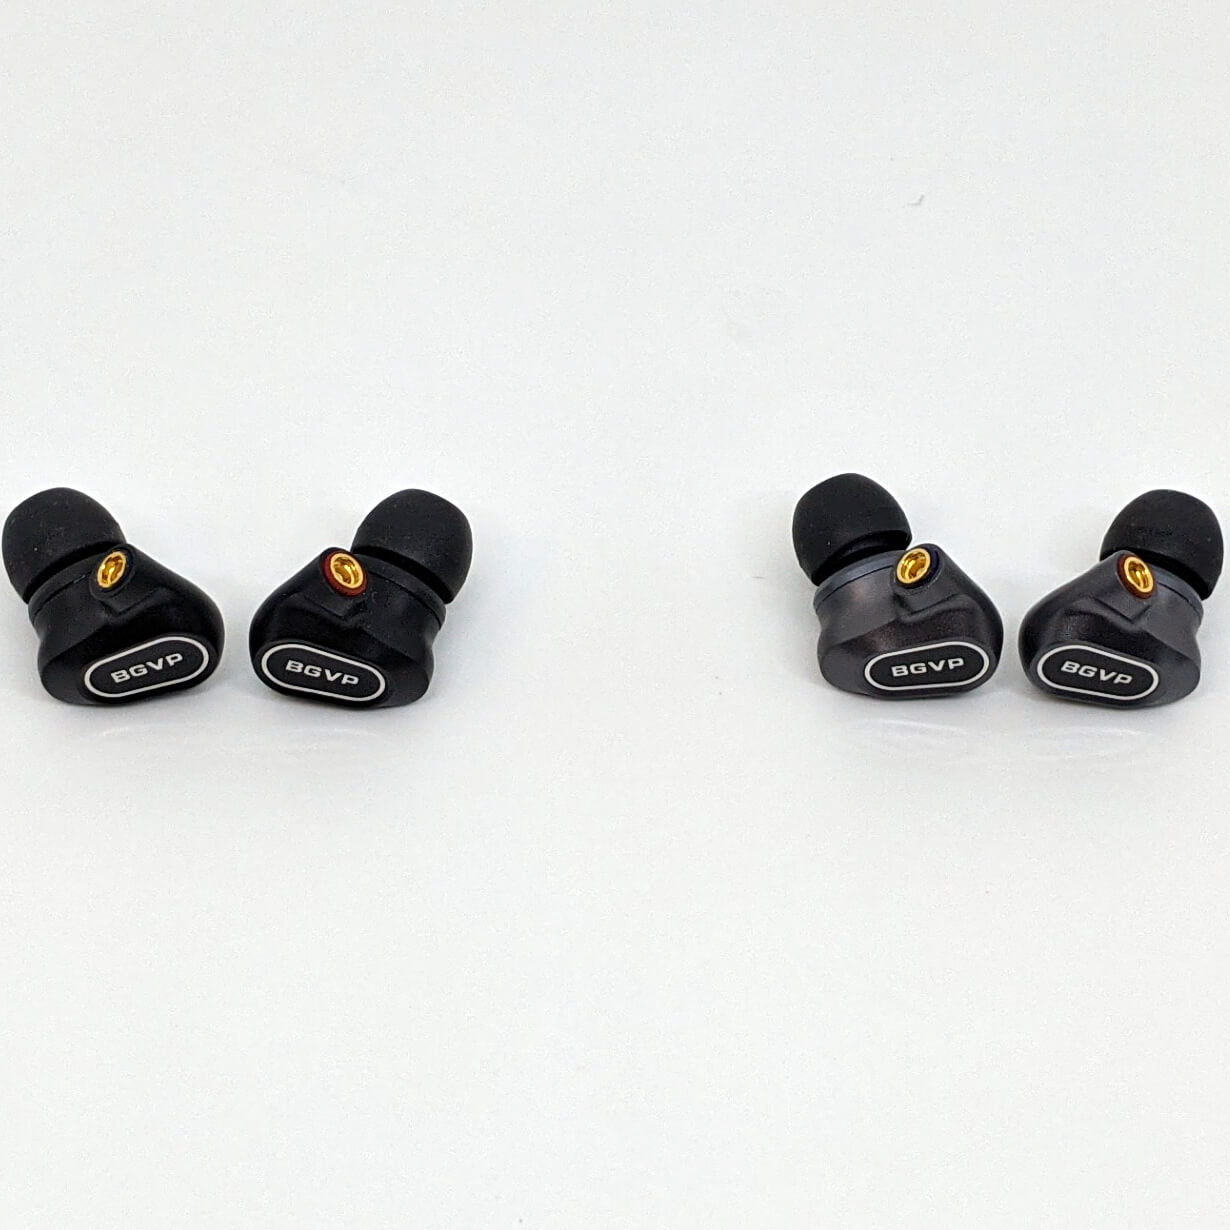 Buy BGVP DN2 Earphone at HiFiNage in India with warranty.